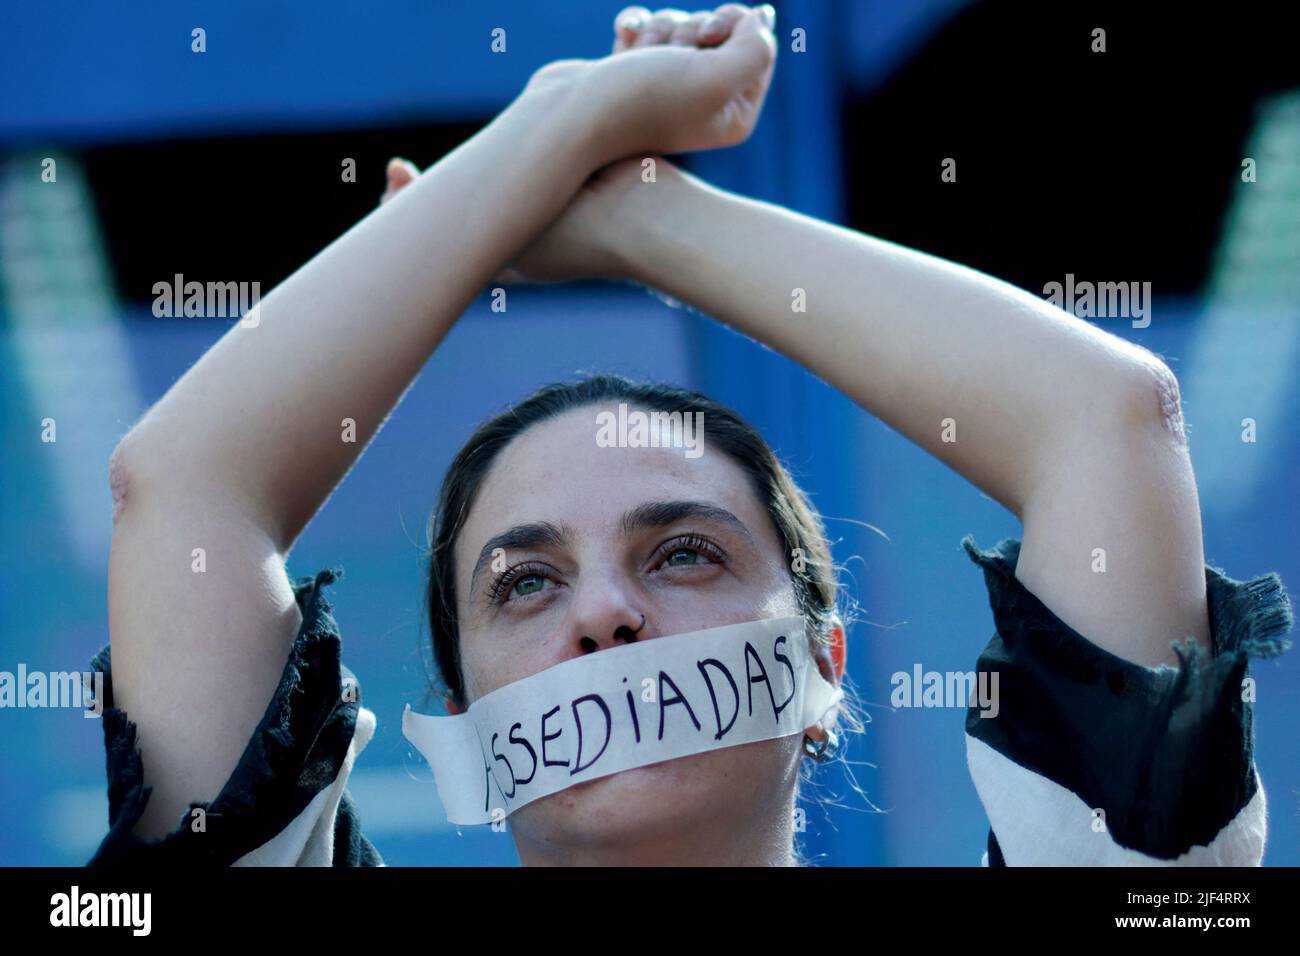 An employee of Caixa Economica Federal bank wears a sticker, reading 'Harassment', over her mouth, during a protest against the bank's president Pedro Guimaraes after allegations of sexual harassment, outside the bank's headquarters in Brasilia, Brazil June 29, 2022. REUTERS/Ueslei Marcelino Stock Photo